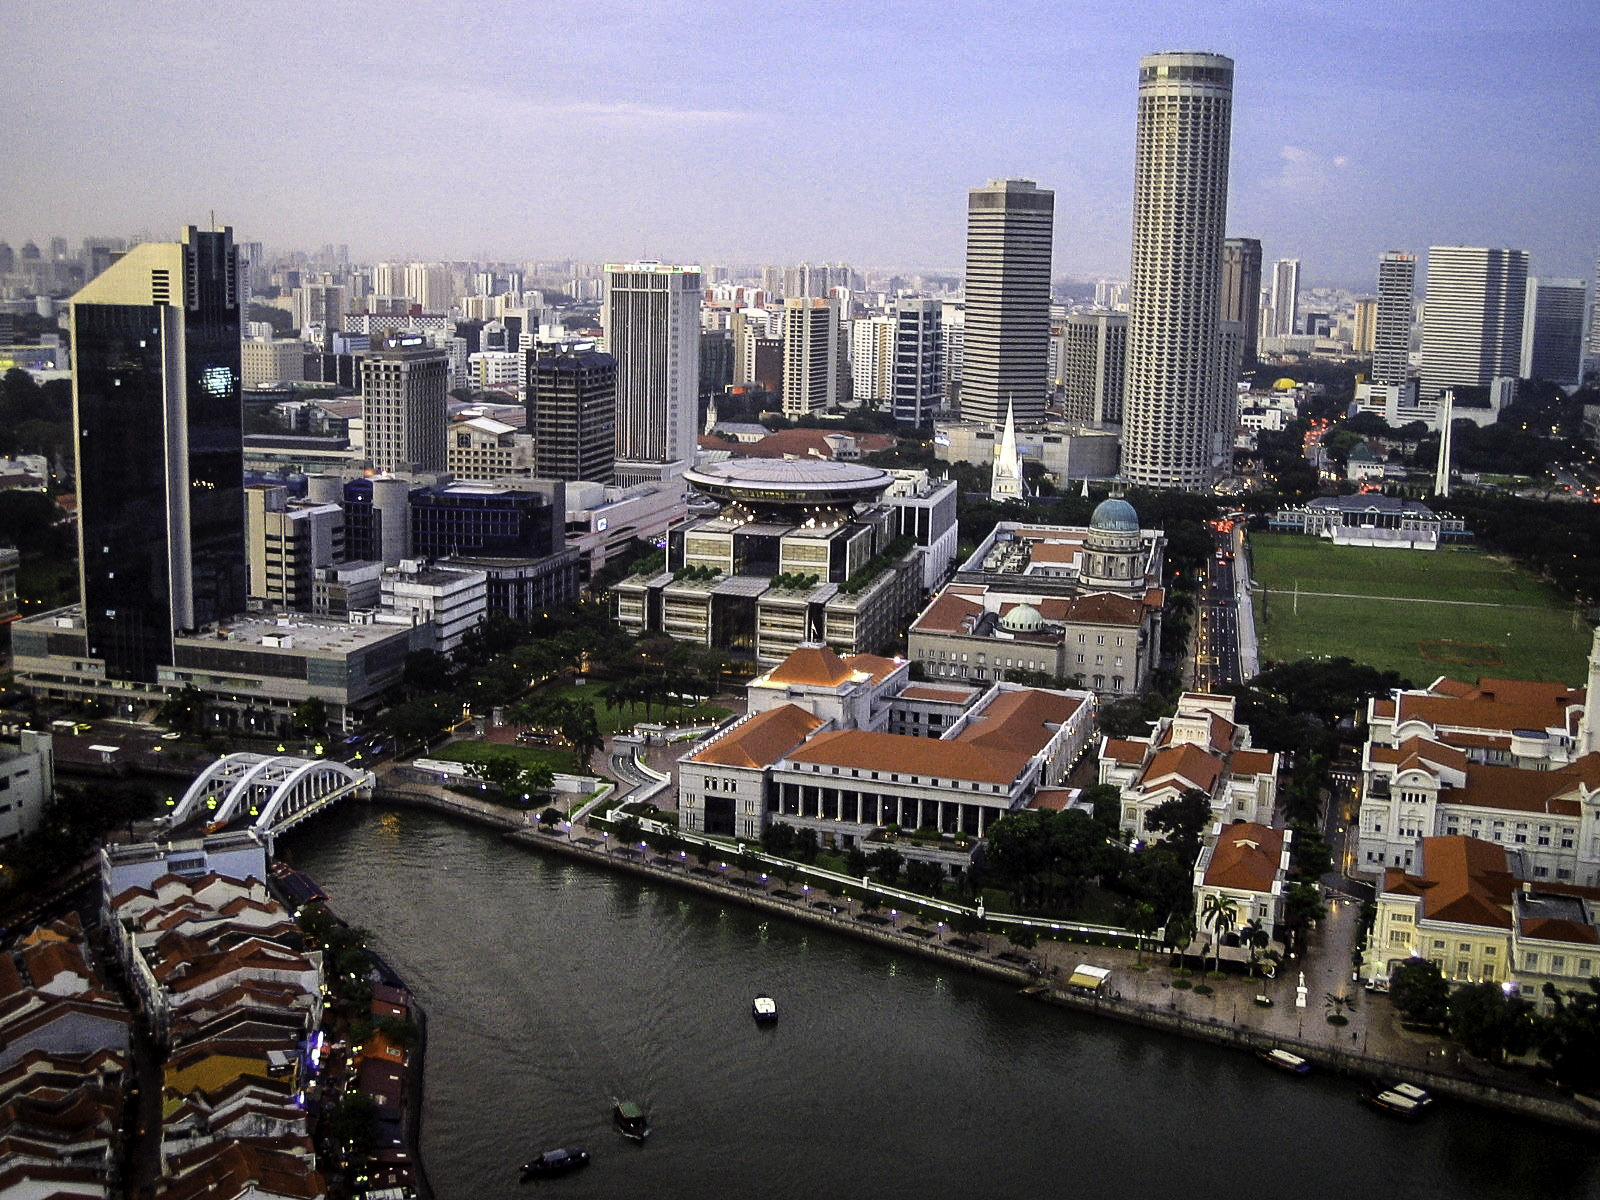 Singapore River and Cityscape with Skyscrapers image - Free stock ...